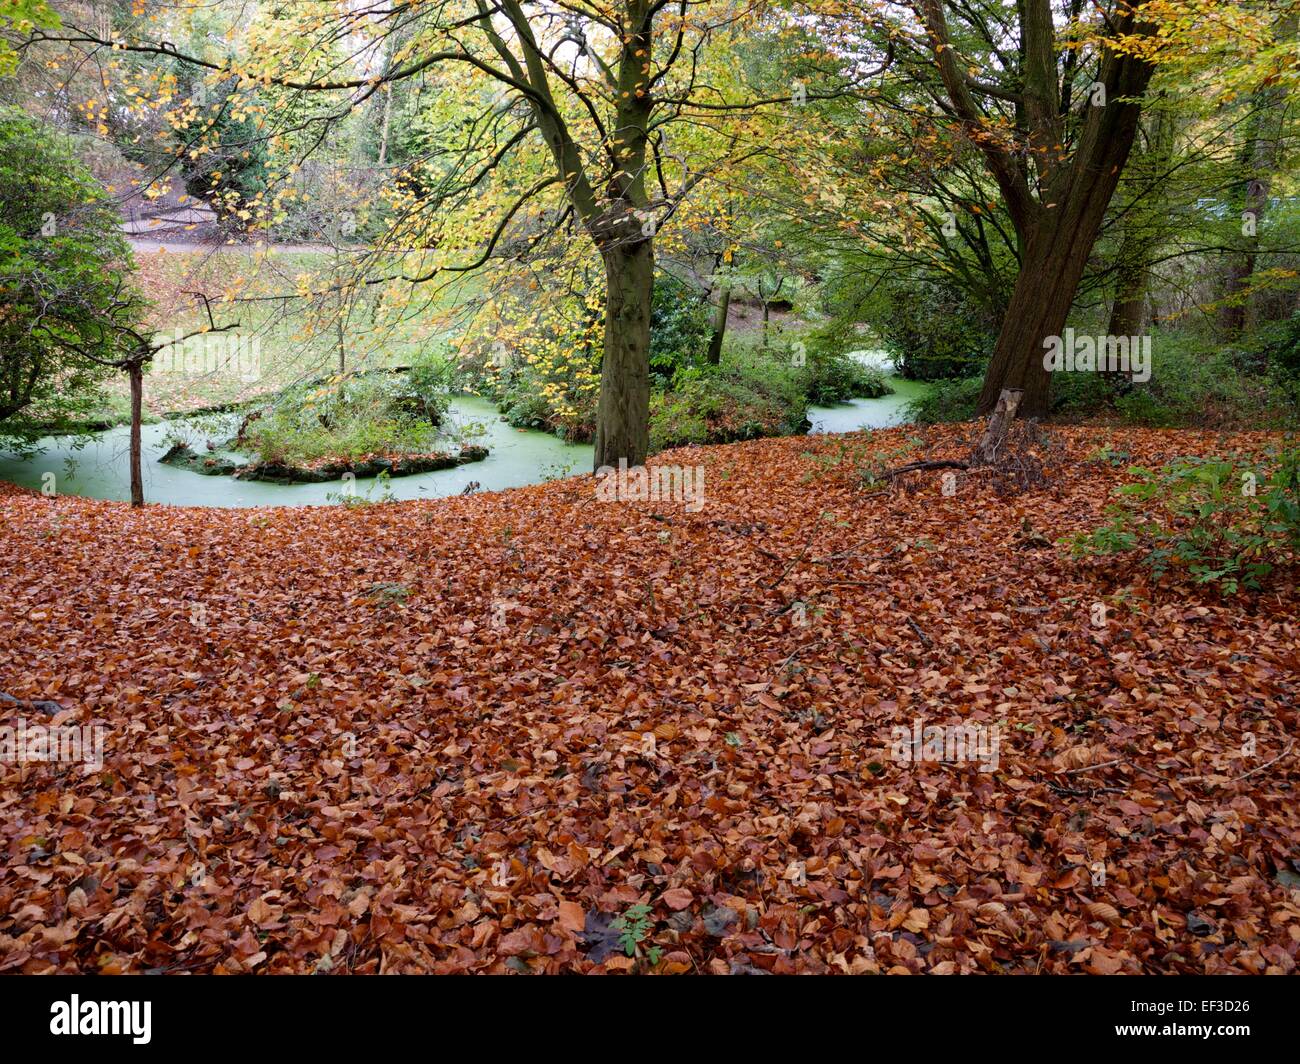 Autumn leaves in a wooded area and a stream running through Stock Photo